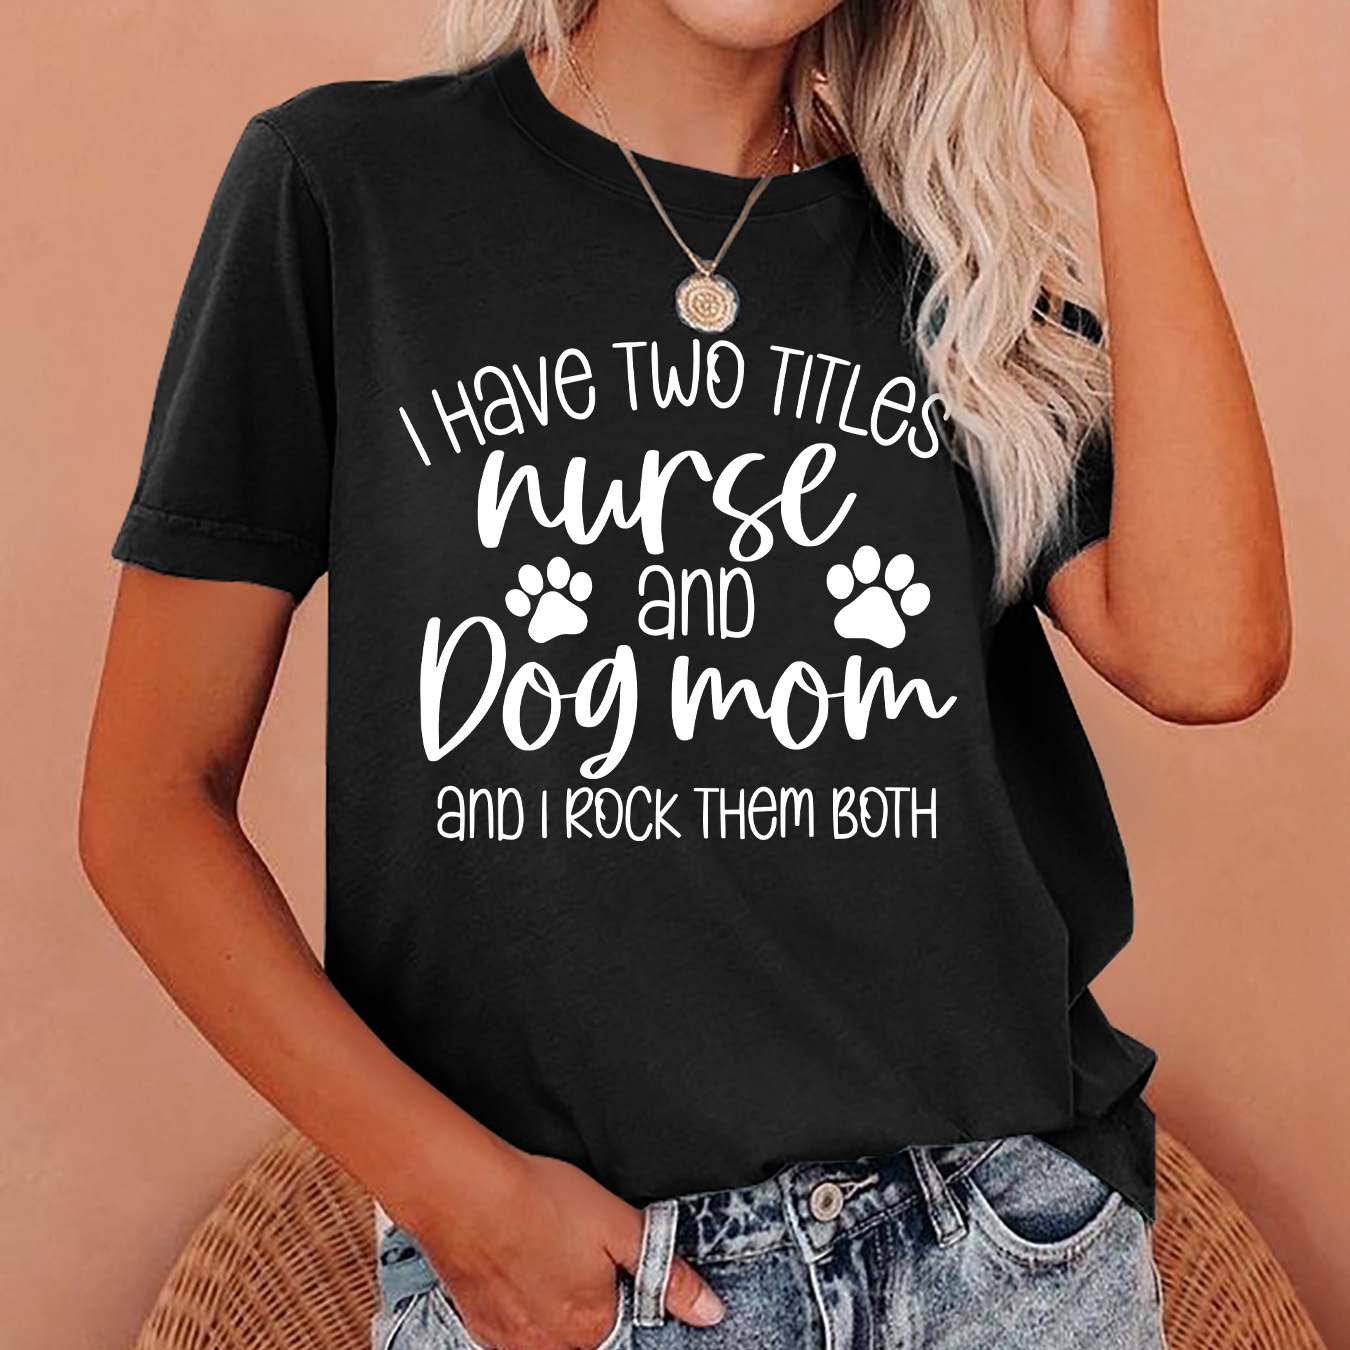 

I Have 2 Titles Nurse And Dog Mom Print T-shirt, Short Sleeve Crew Neck Casual Top For Summer & Spring, Women's Clothing